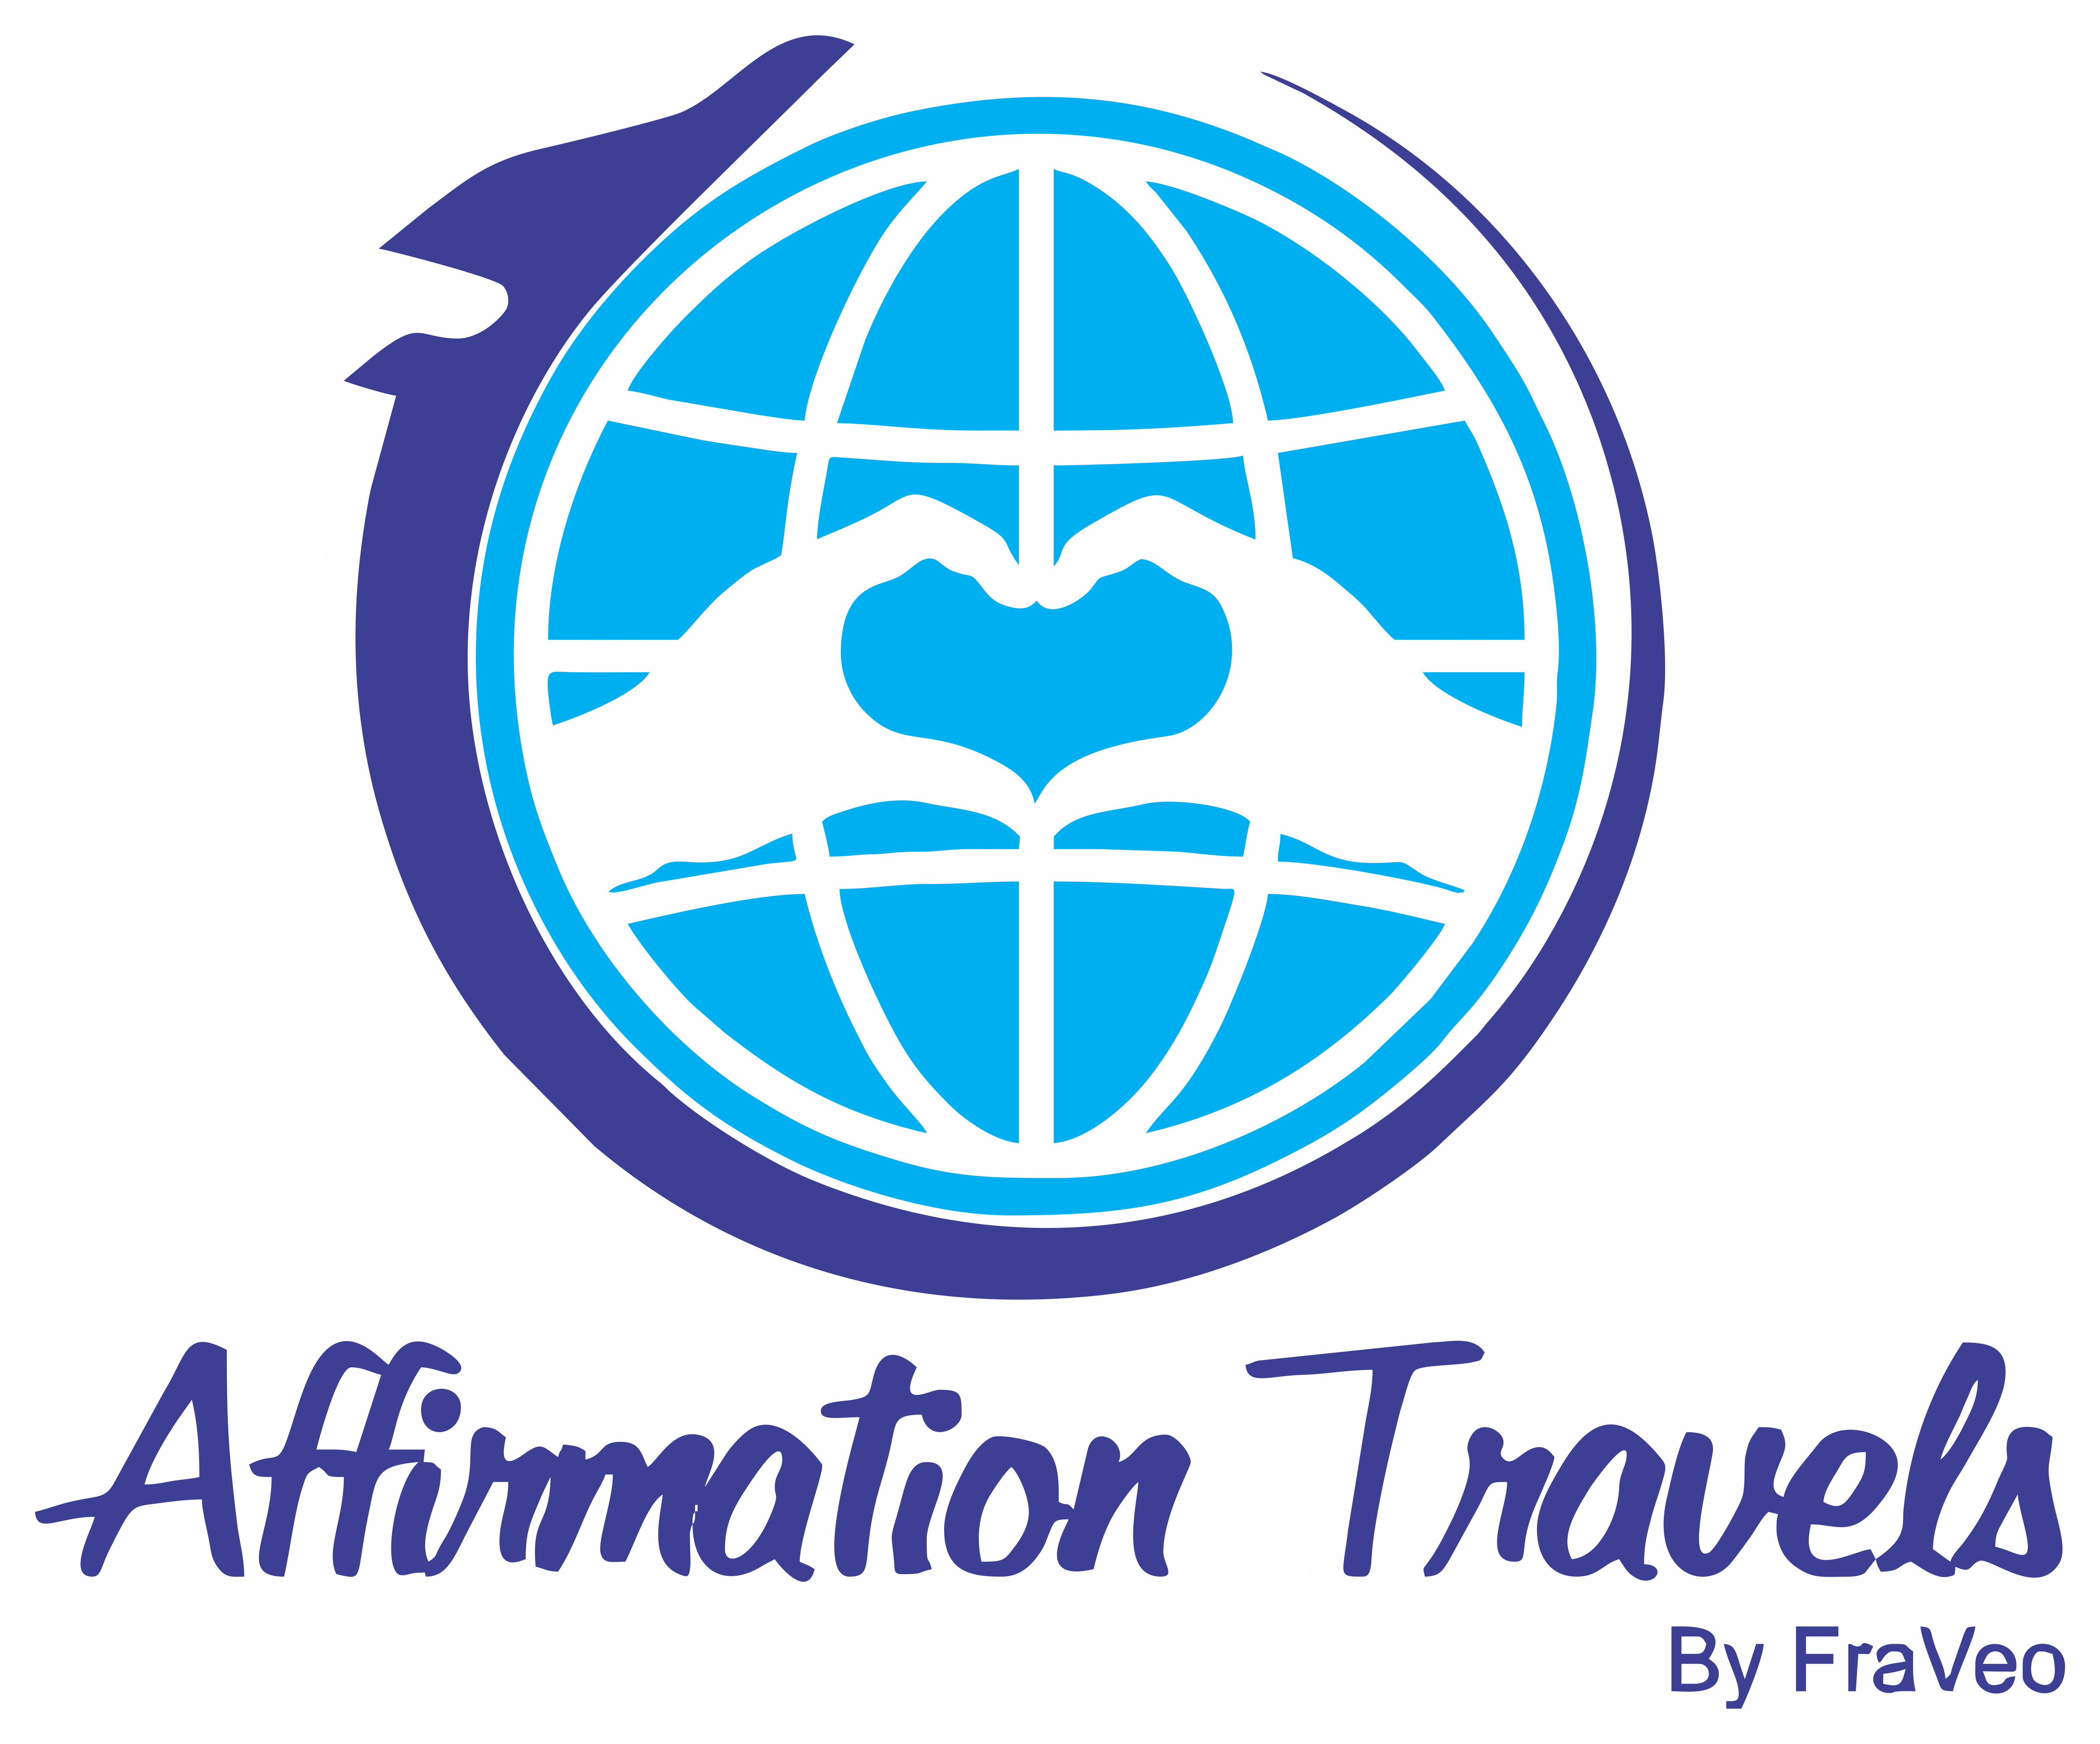 Affirmation Travels by Fraveo 